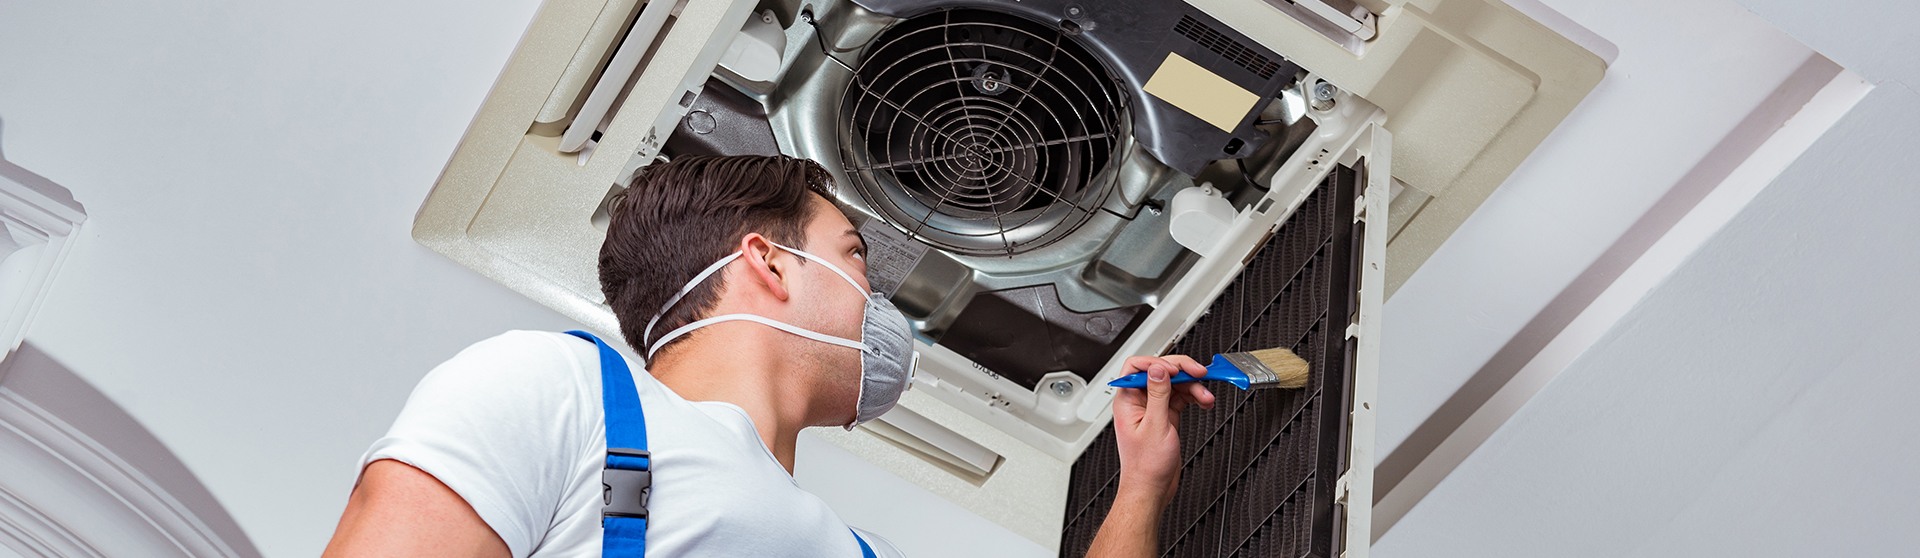 How to Find the Best Duct Cleaning Professionals